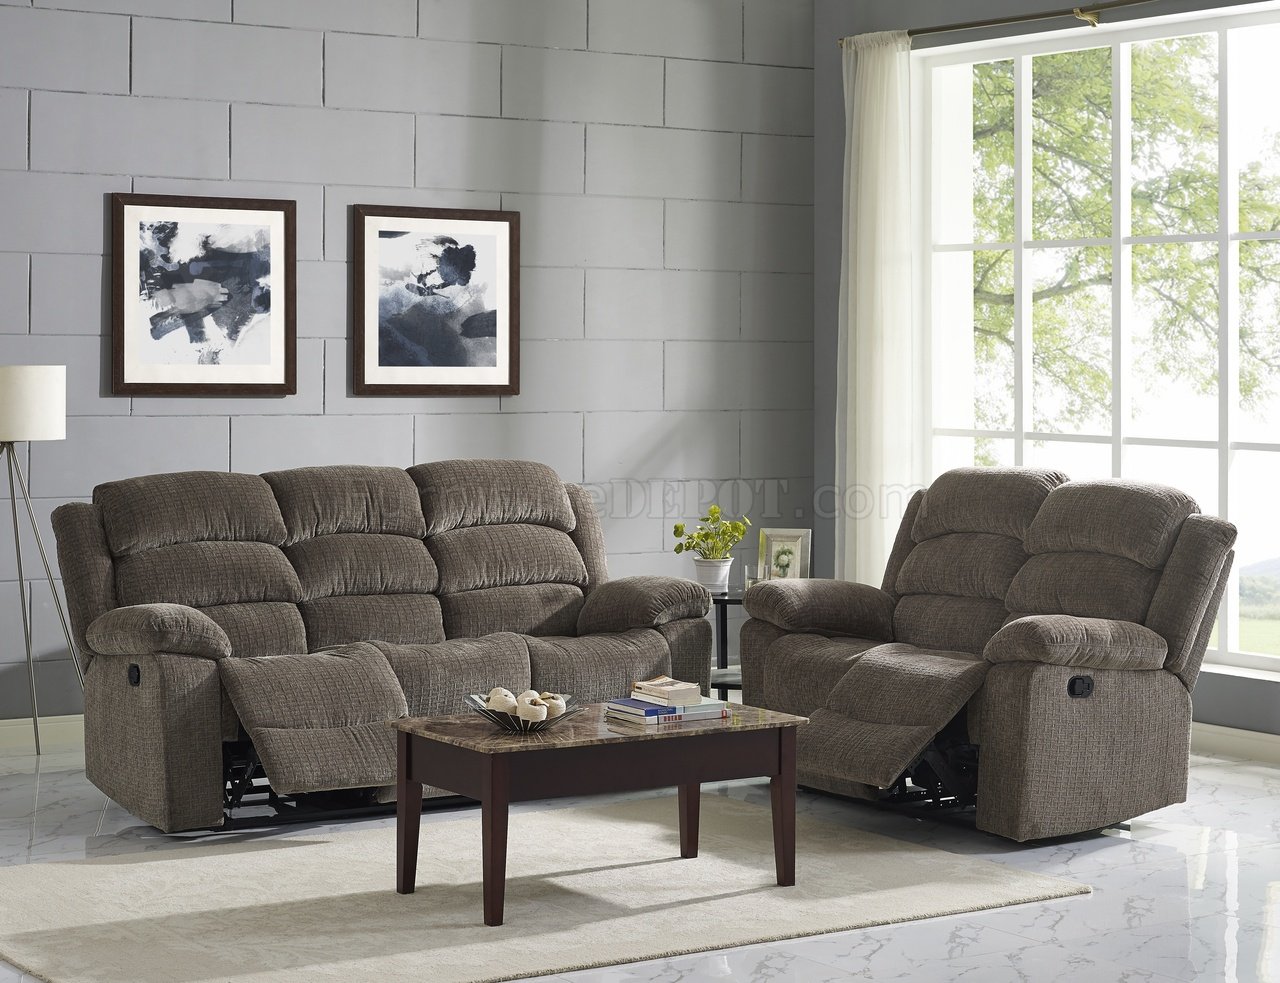 Austin Motion Sofa 2134 In Stone Fabric By Ncfurniture W Options